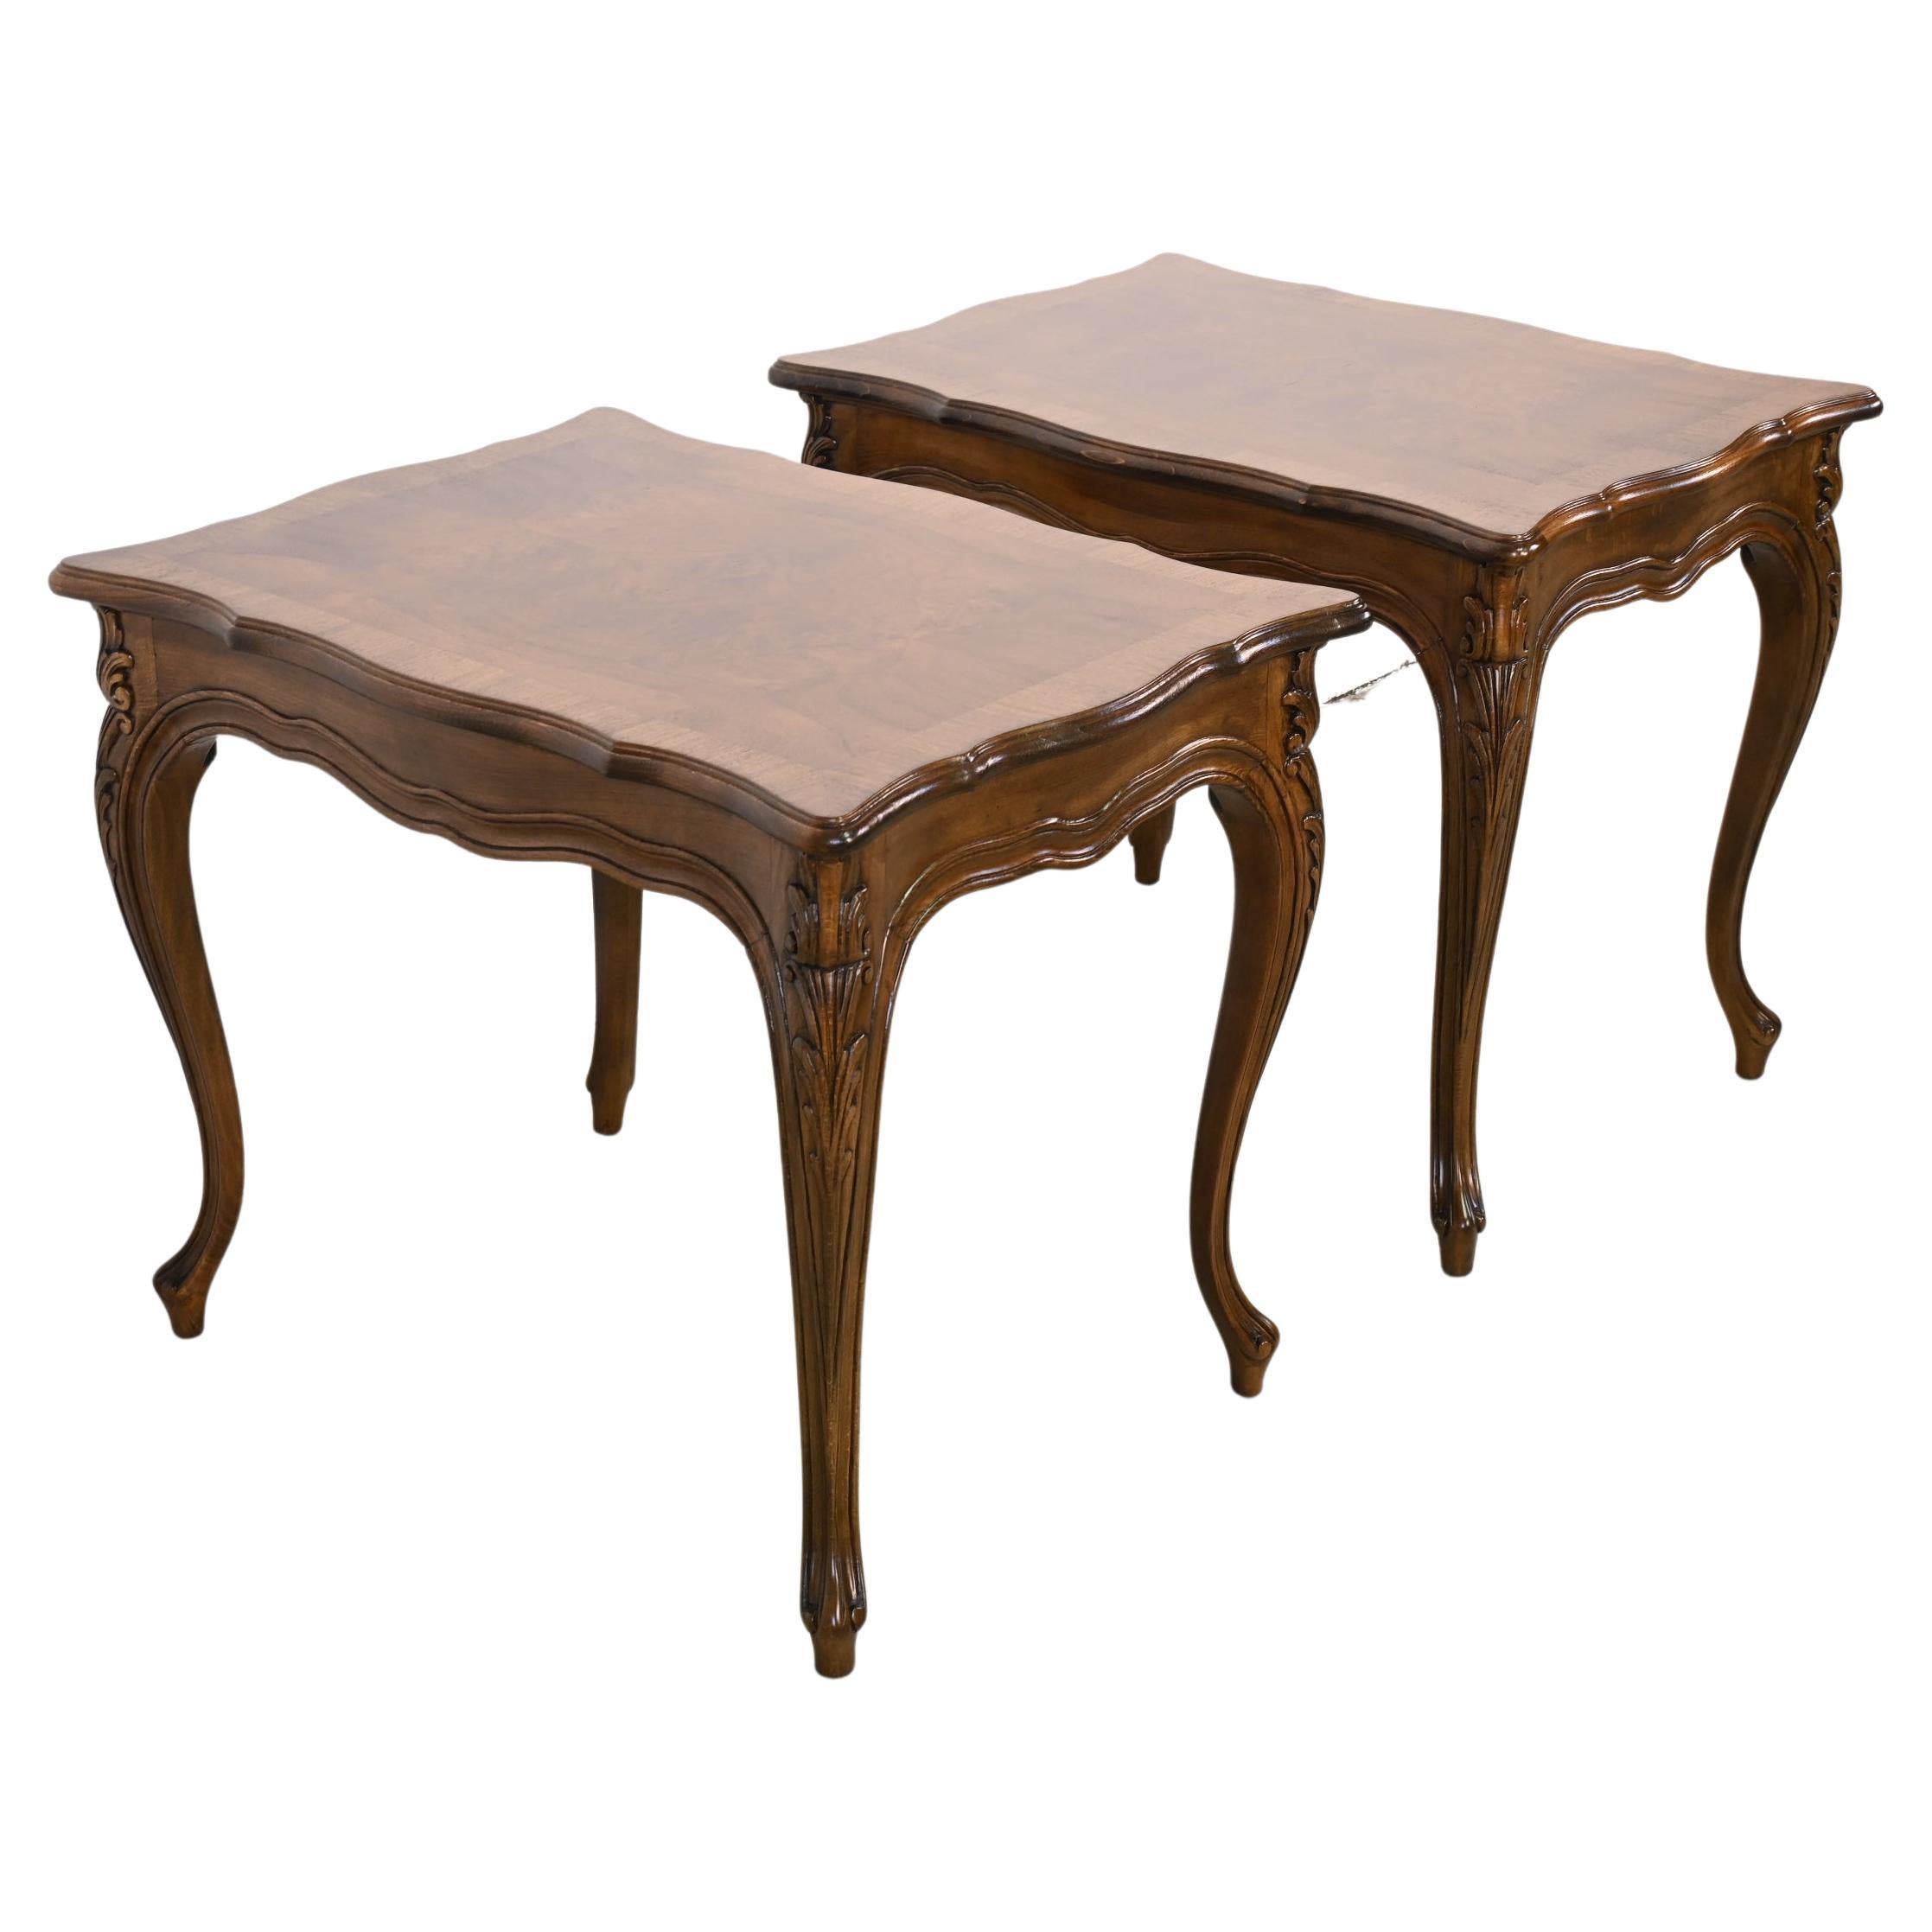 Karges Furniture French Provincial Burled Walnut End Tables - a Pair